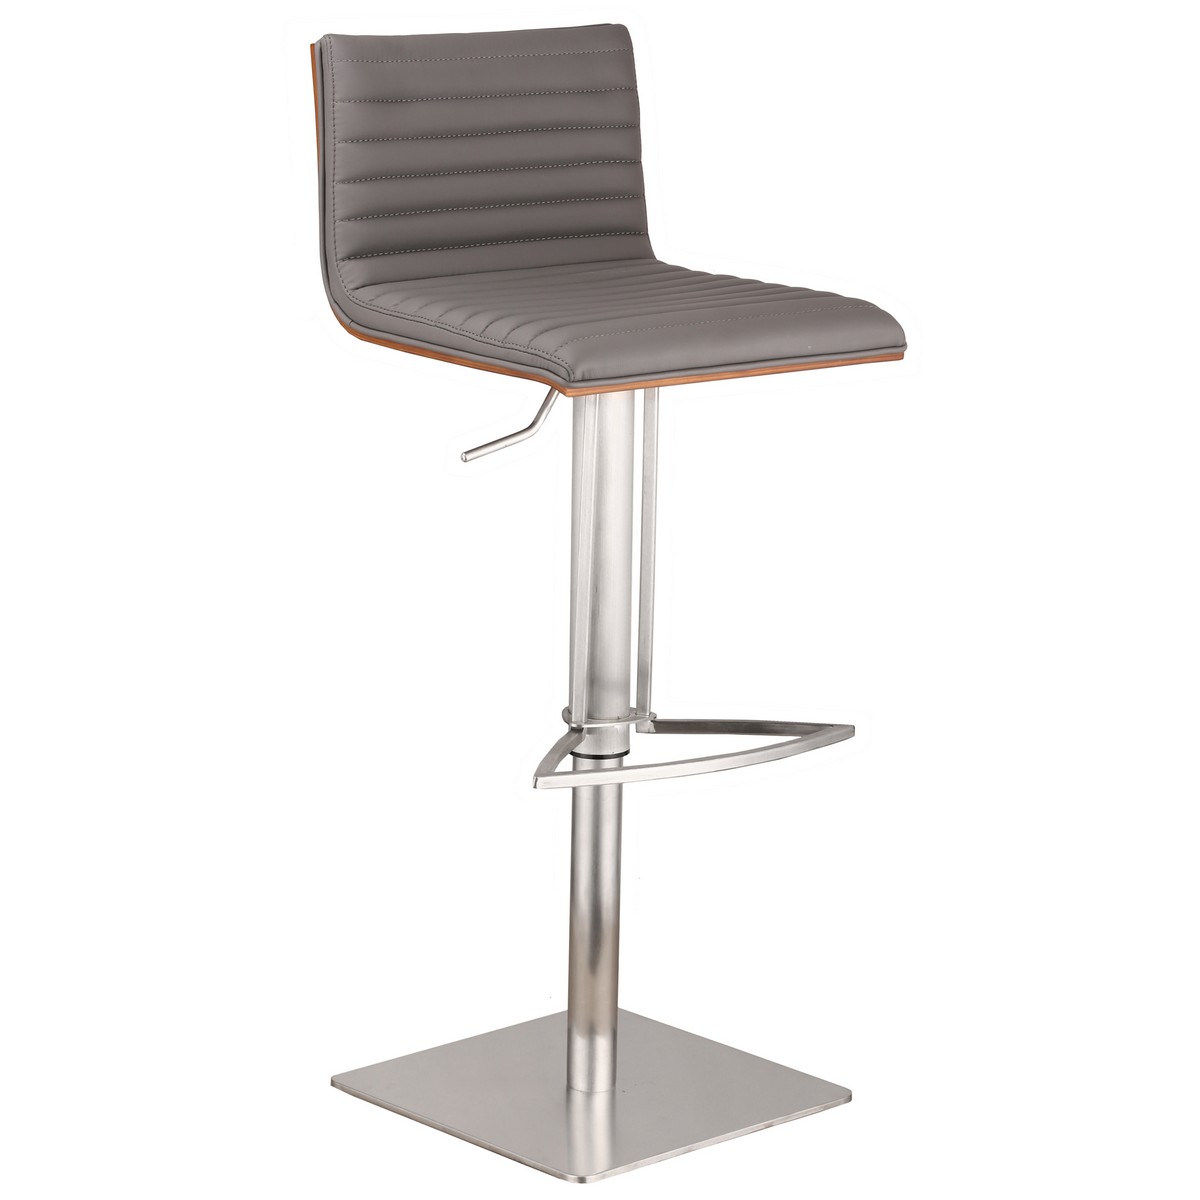 Armen Living Cafe Adjustable Brushed Stainless Steel Barstool in Gray Leatherette with Walnut Back